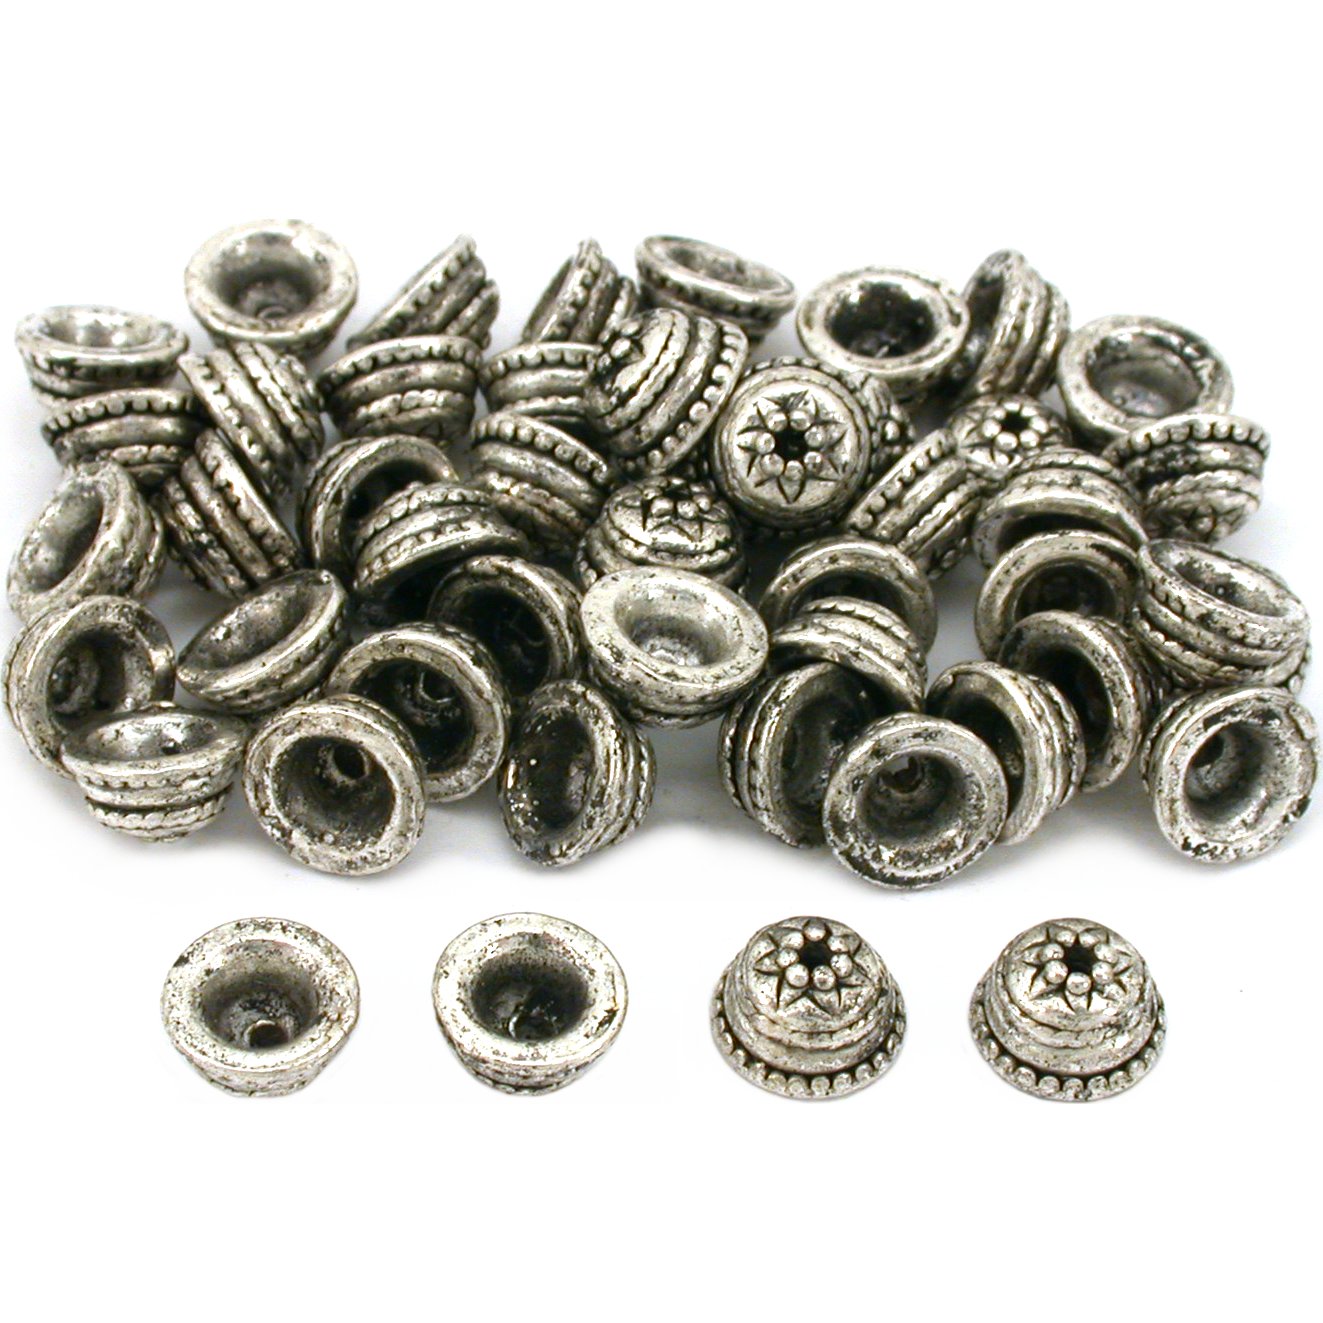 Bali Bead Caps Antique Silver Plated 9.5mm 50Pcs Approx.